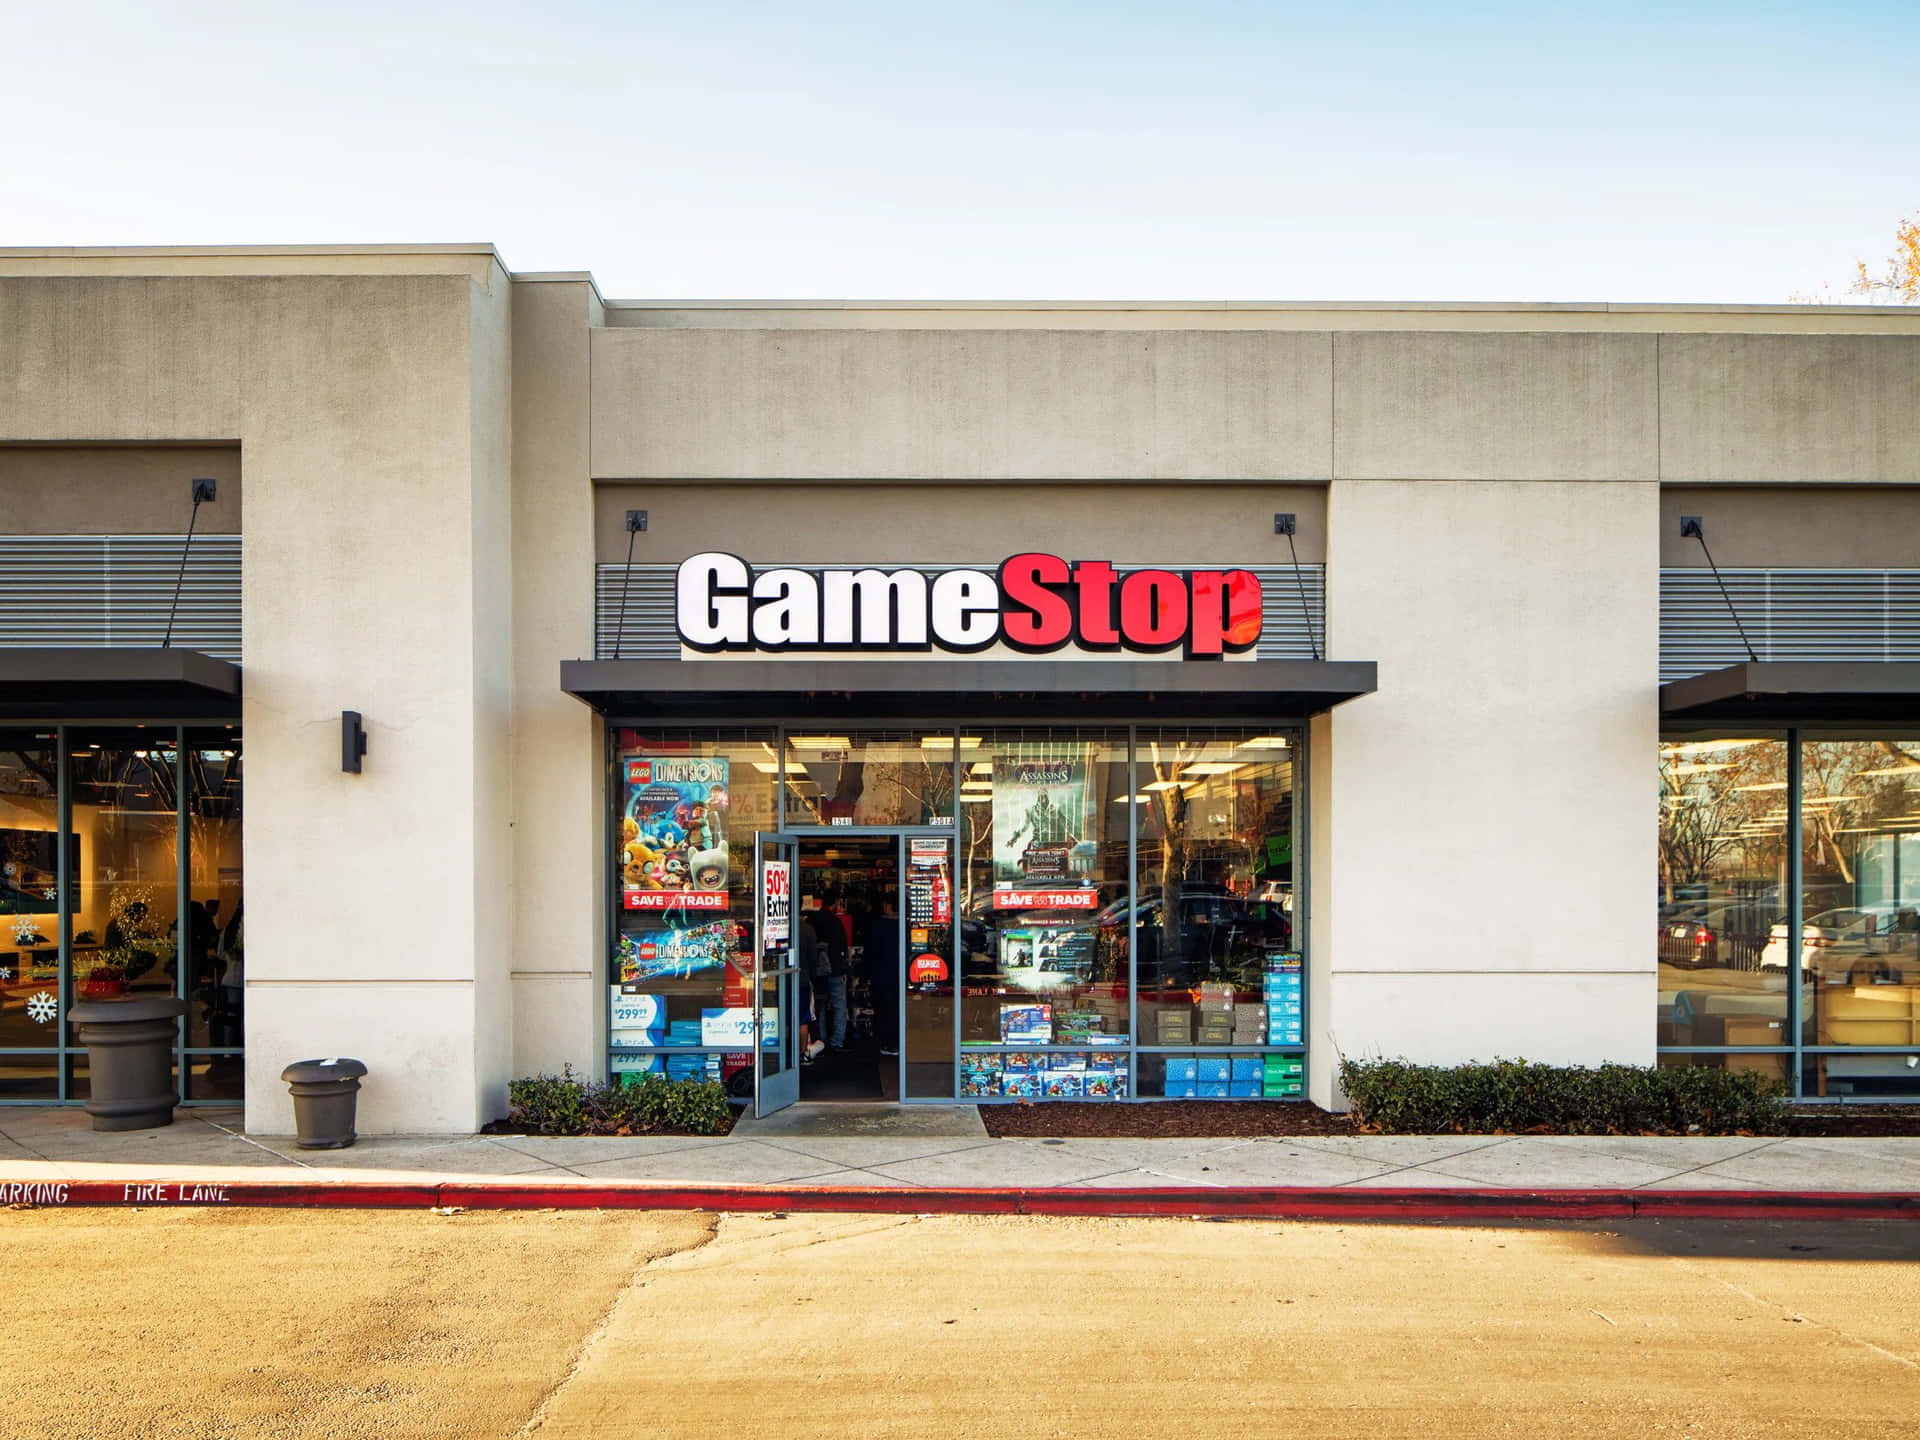 Find Your Next Favorite Game at Gamestop!